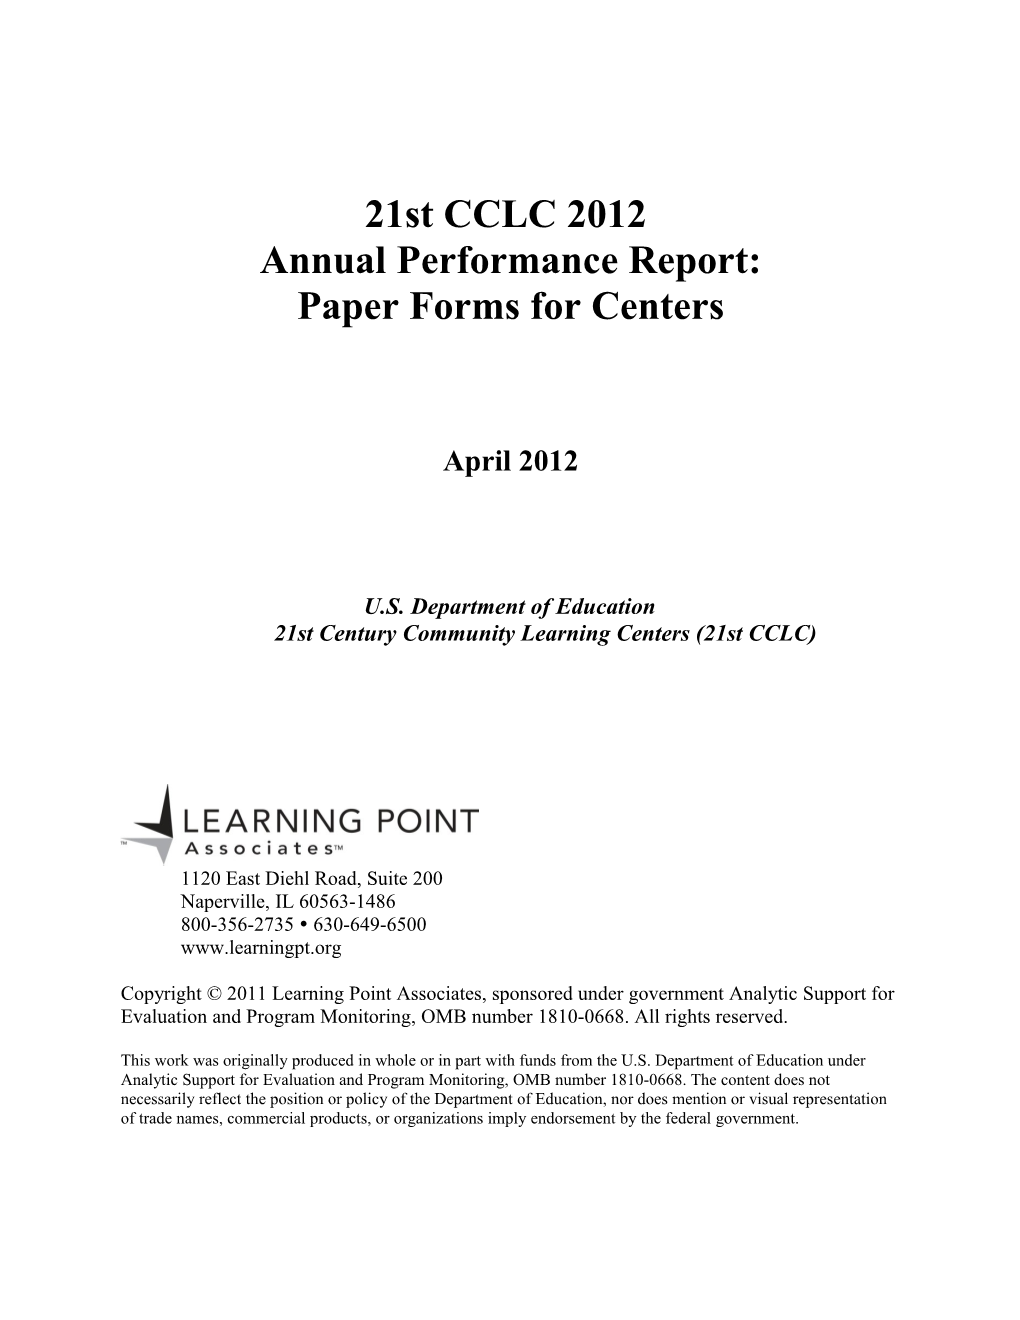 U.S. Department of Education21st Century Community Learning Centers (21St CCLC)